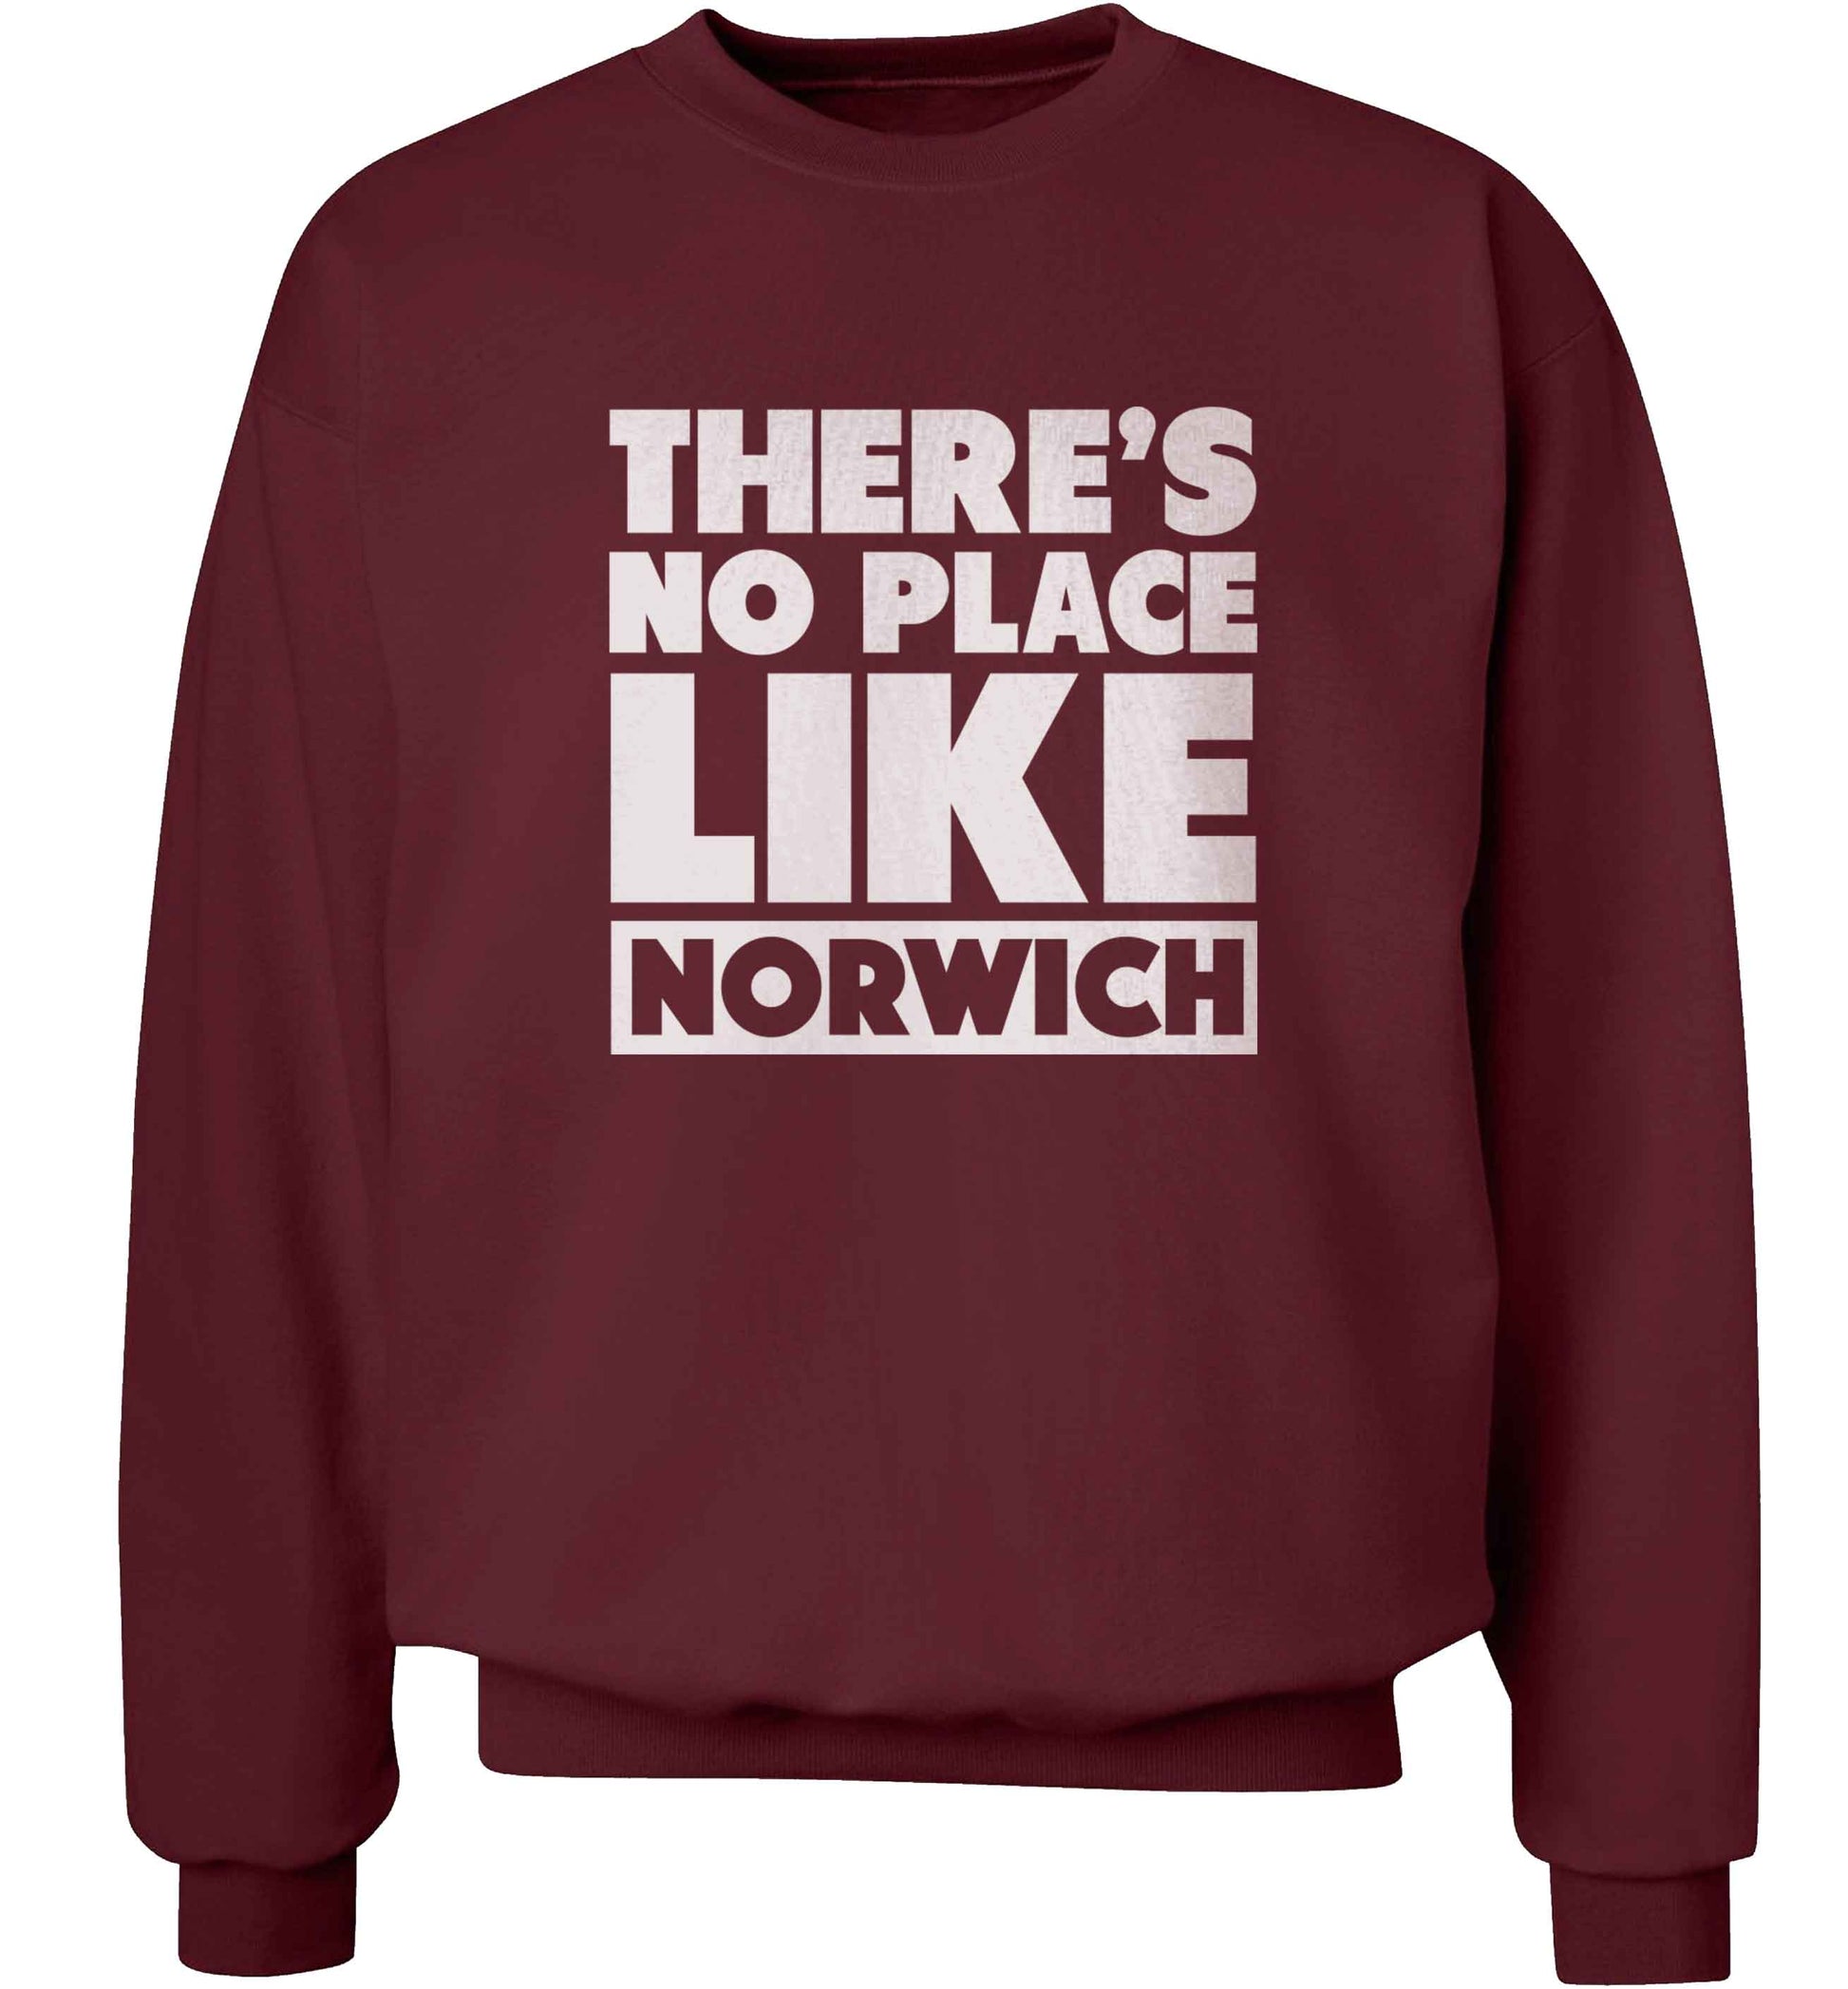 There's no place like Norwich adult's unisex maroon sweater 2XL